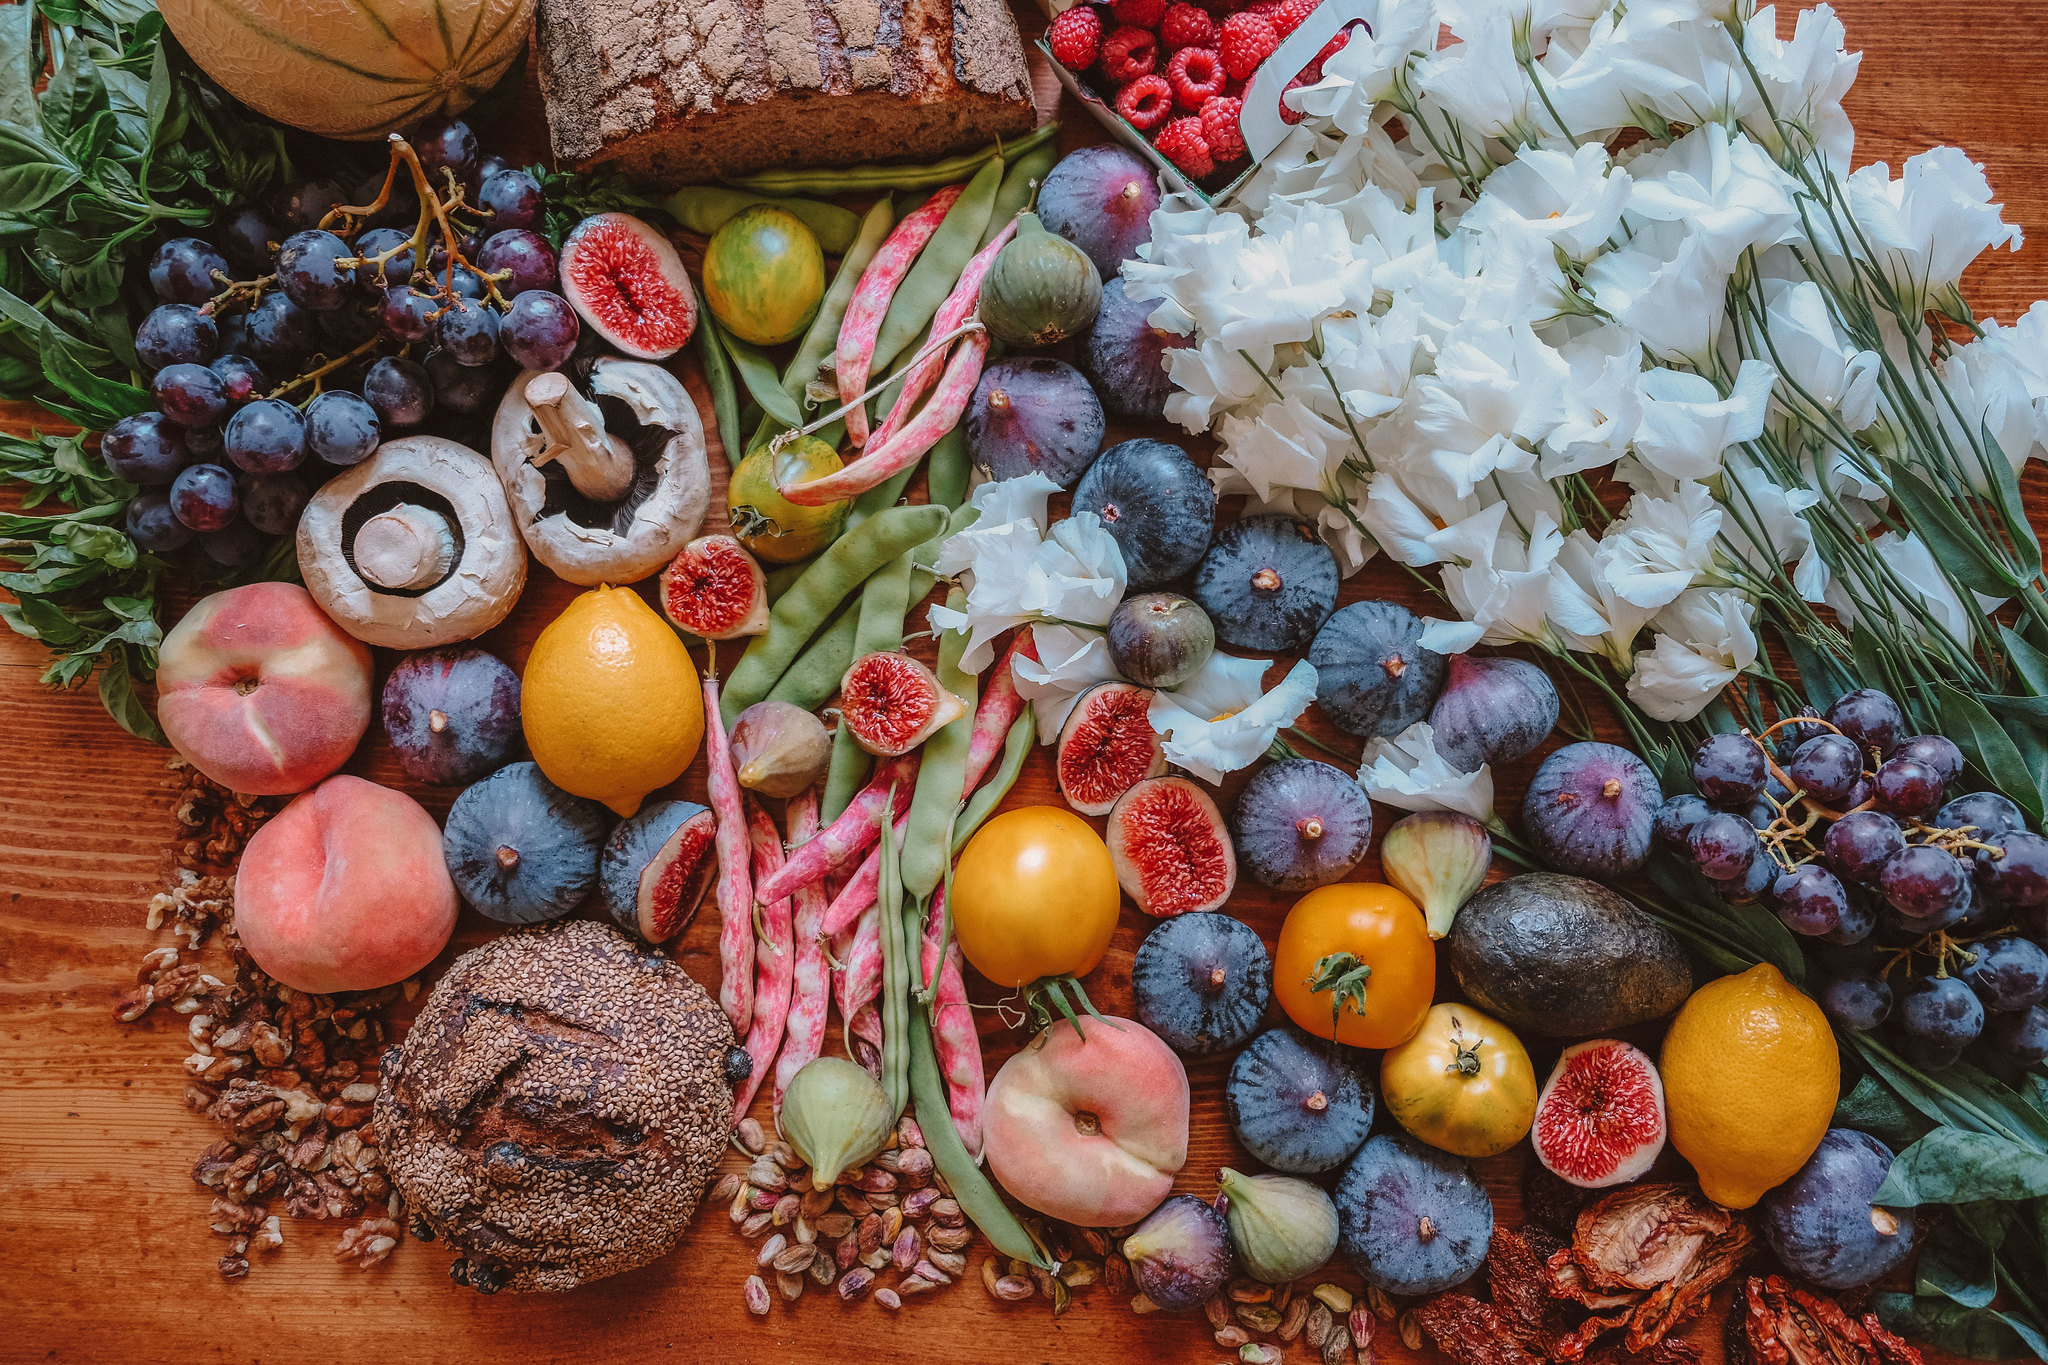 Fruits, vegetables and bread. Photo: Ella Olsson (CC BY 2.0)